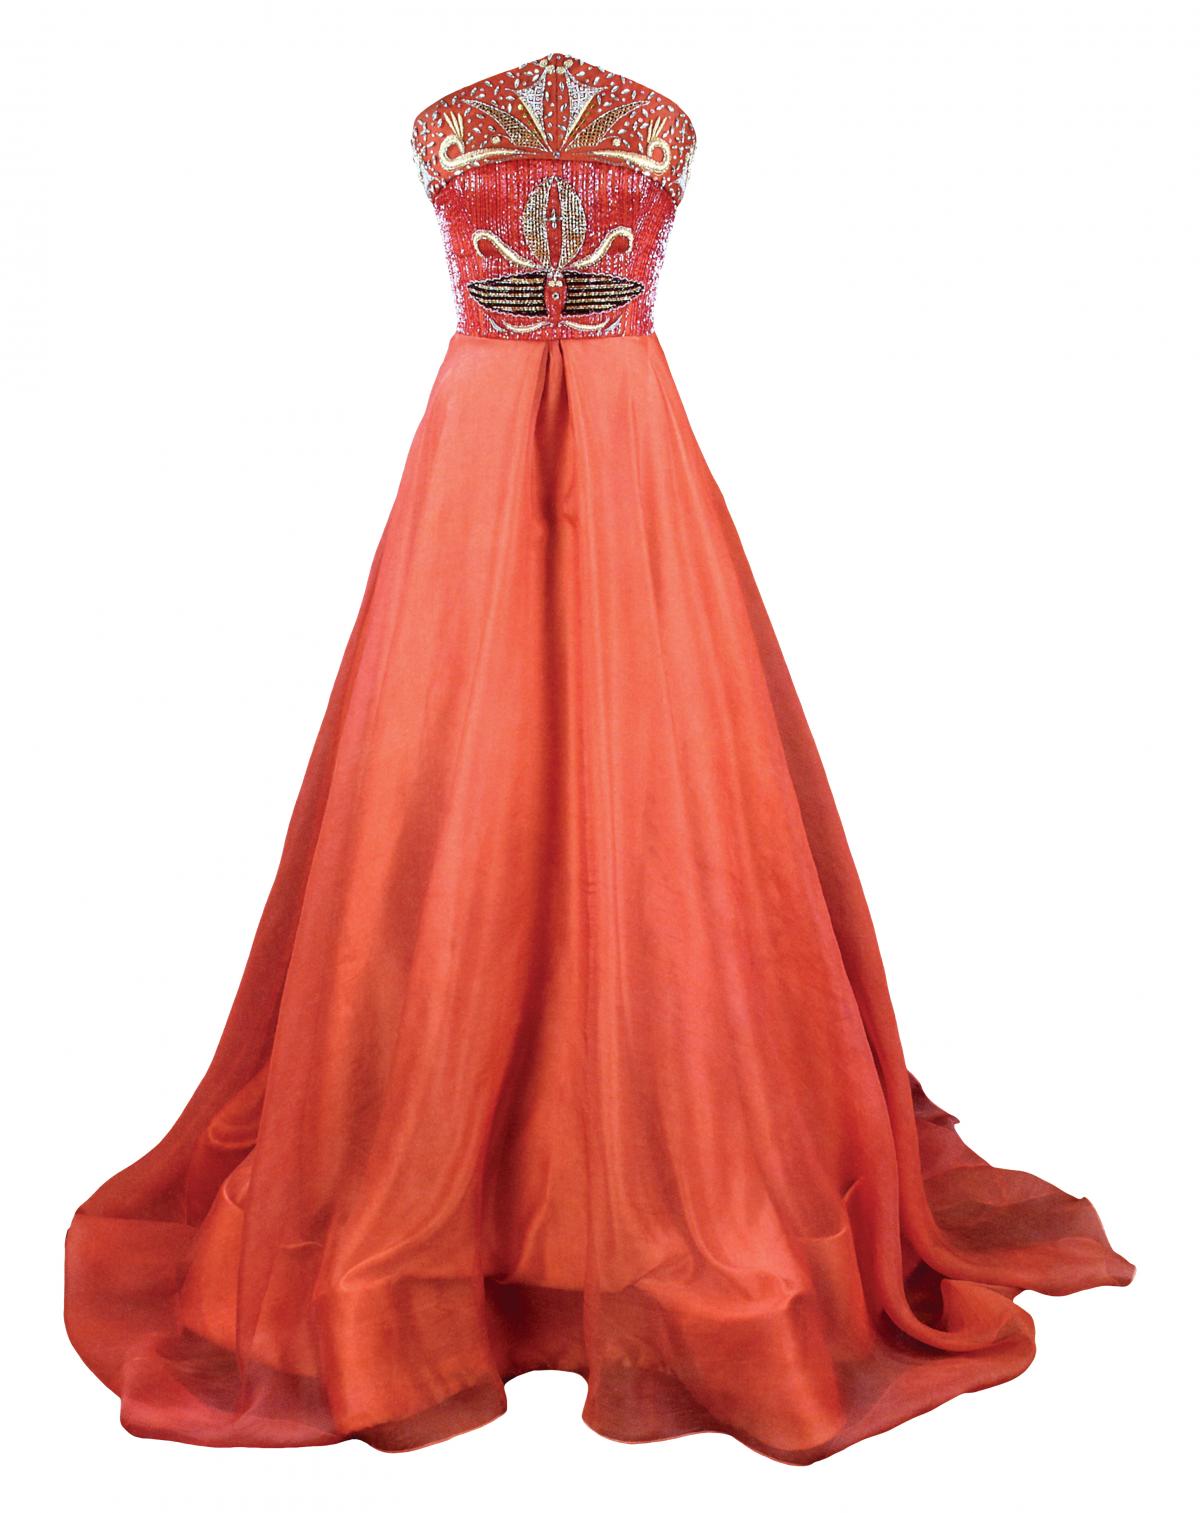 Full-length red evening gown with an a-line skirt and jeweled bodice